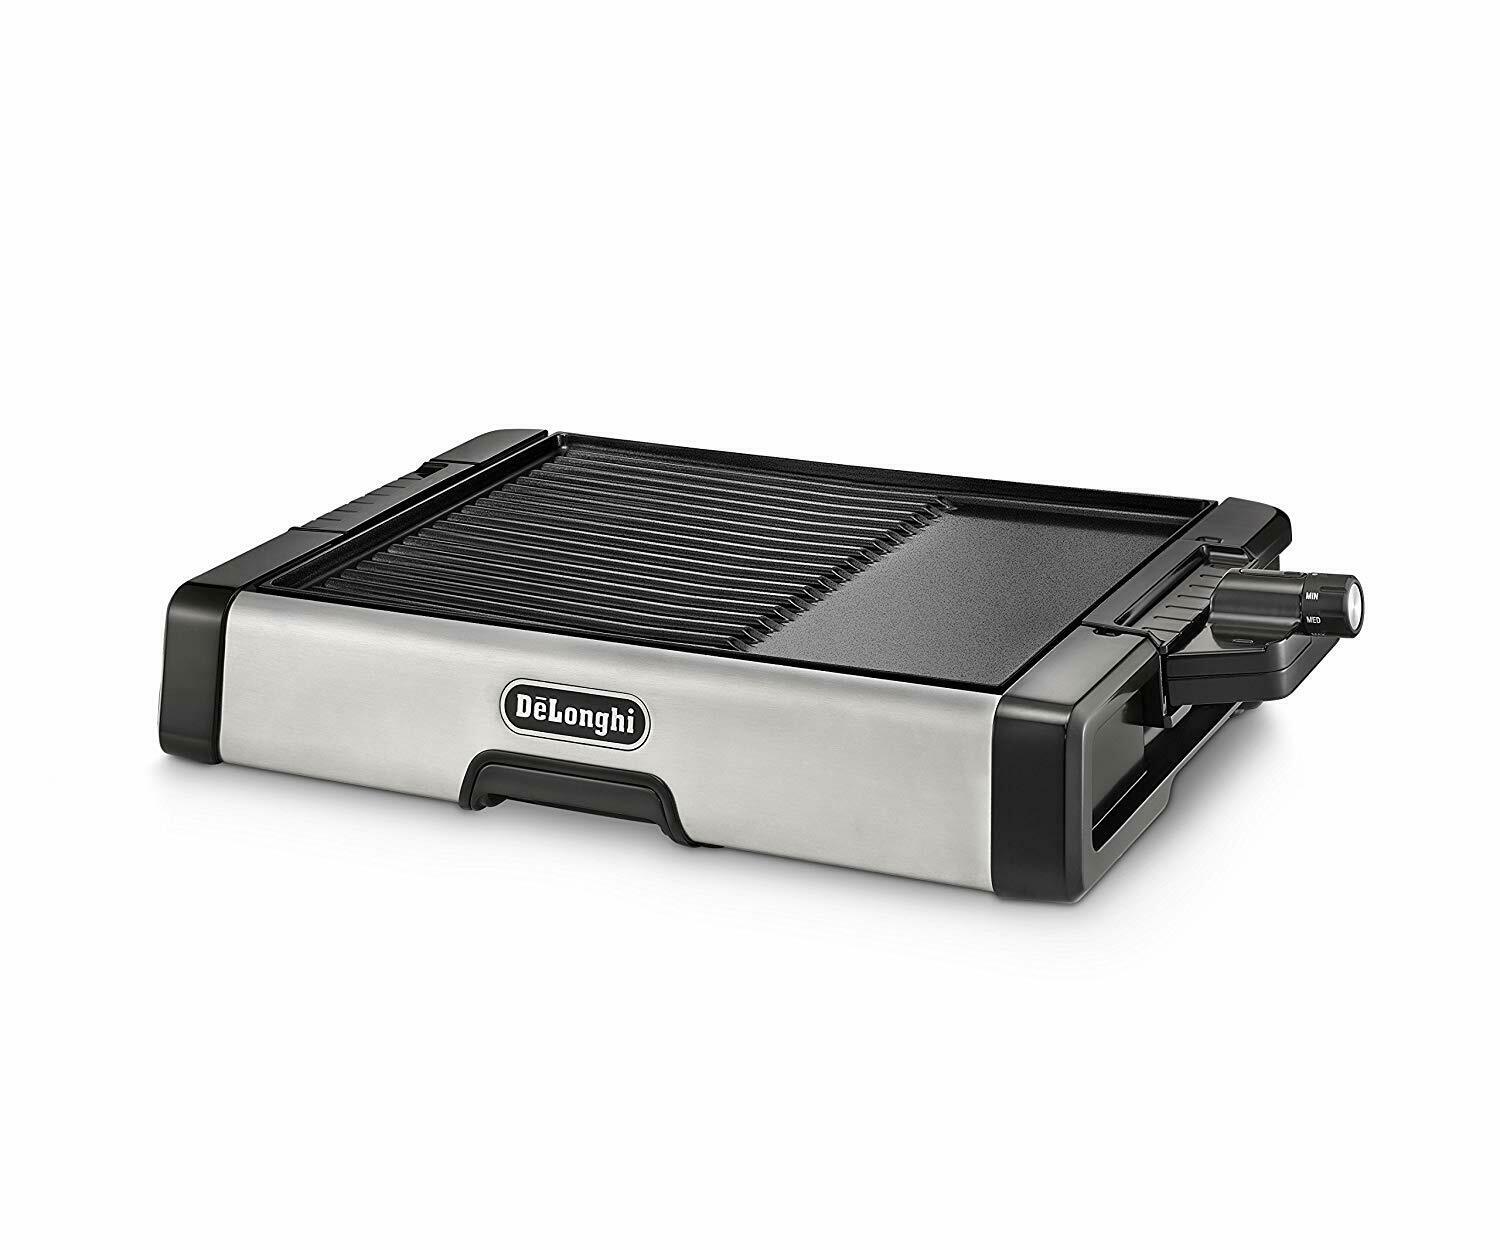 https://www.220stores.com/Shared/Images/Product/Delonghi-BG500C-220-Volt-Grill-amp-Griddle-with-Temp-Control-For-Export-Overseas-Use-Only/BG500C.jpg